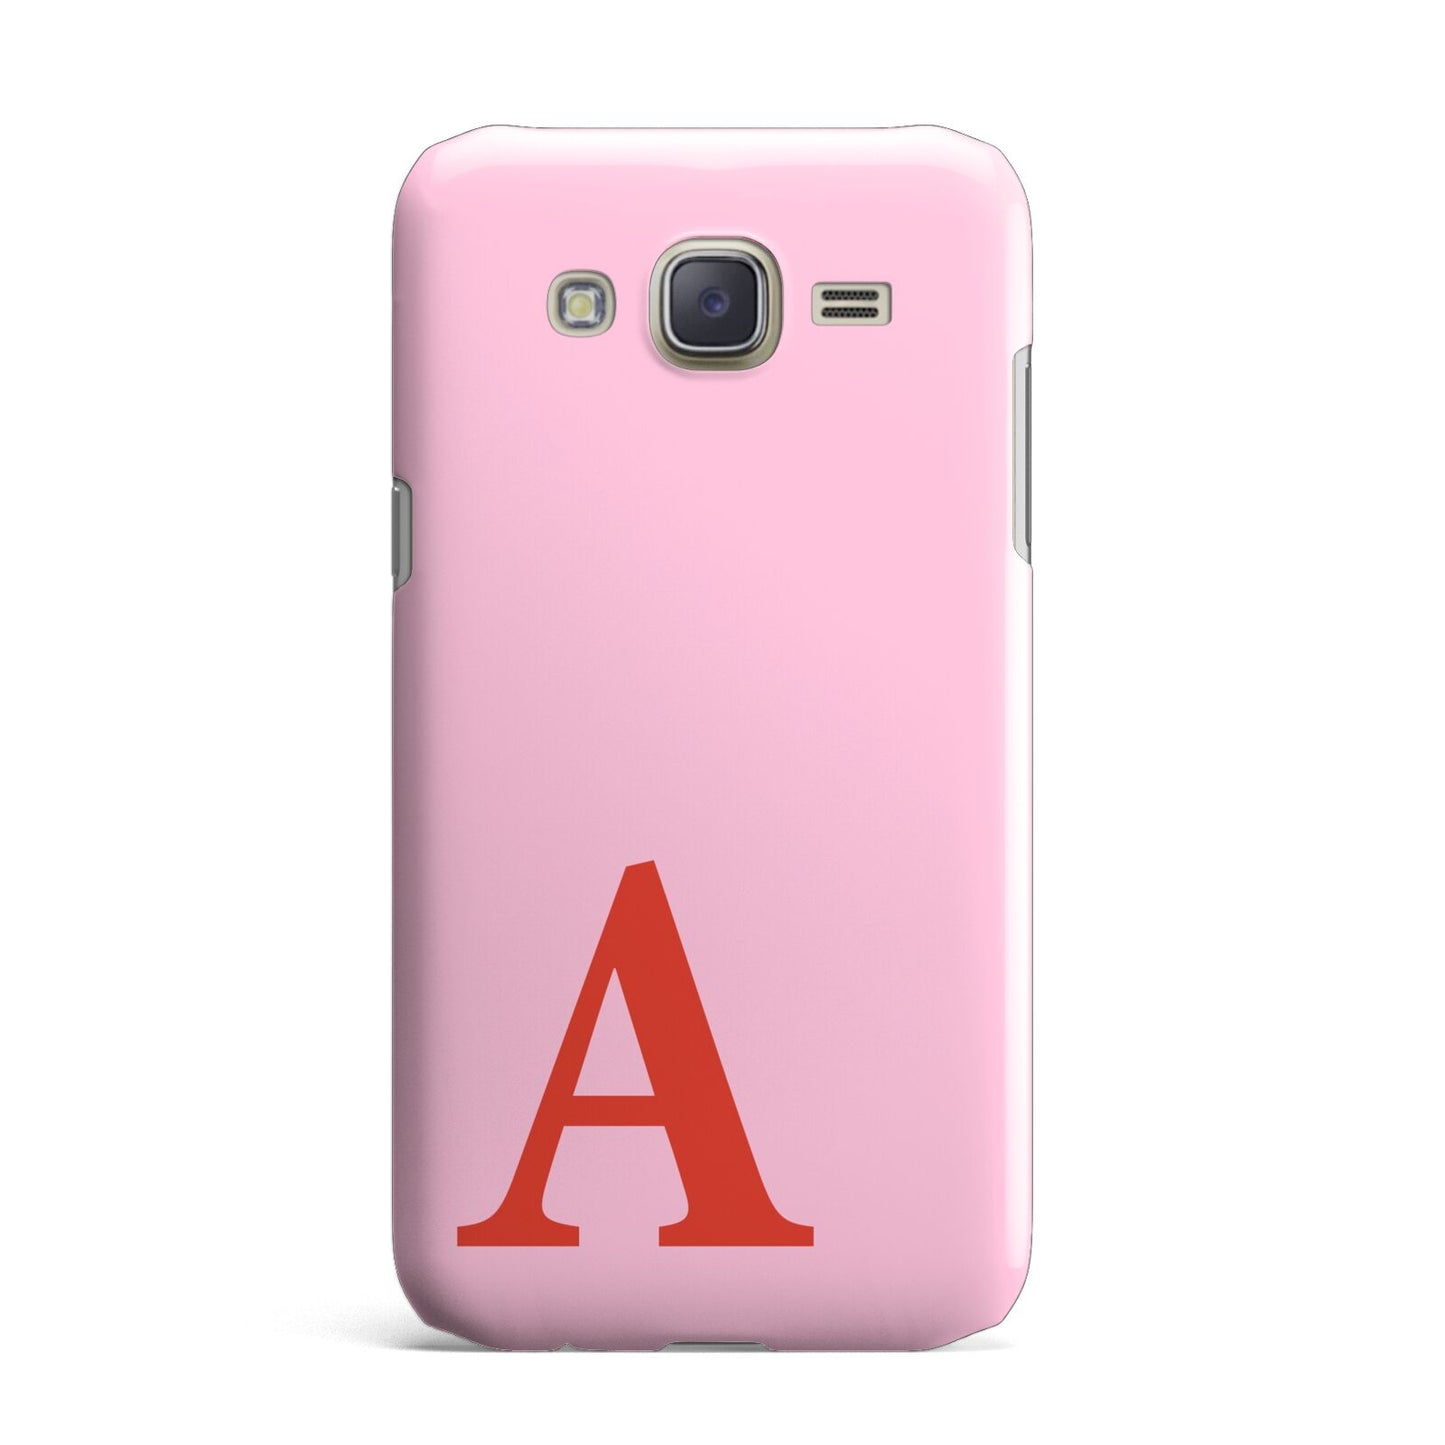 Personalised Pink and Red Samsung Galaxy J7 Case